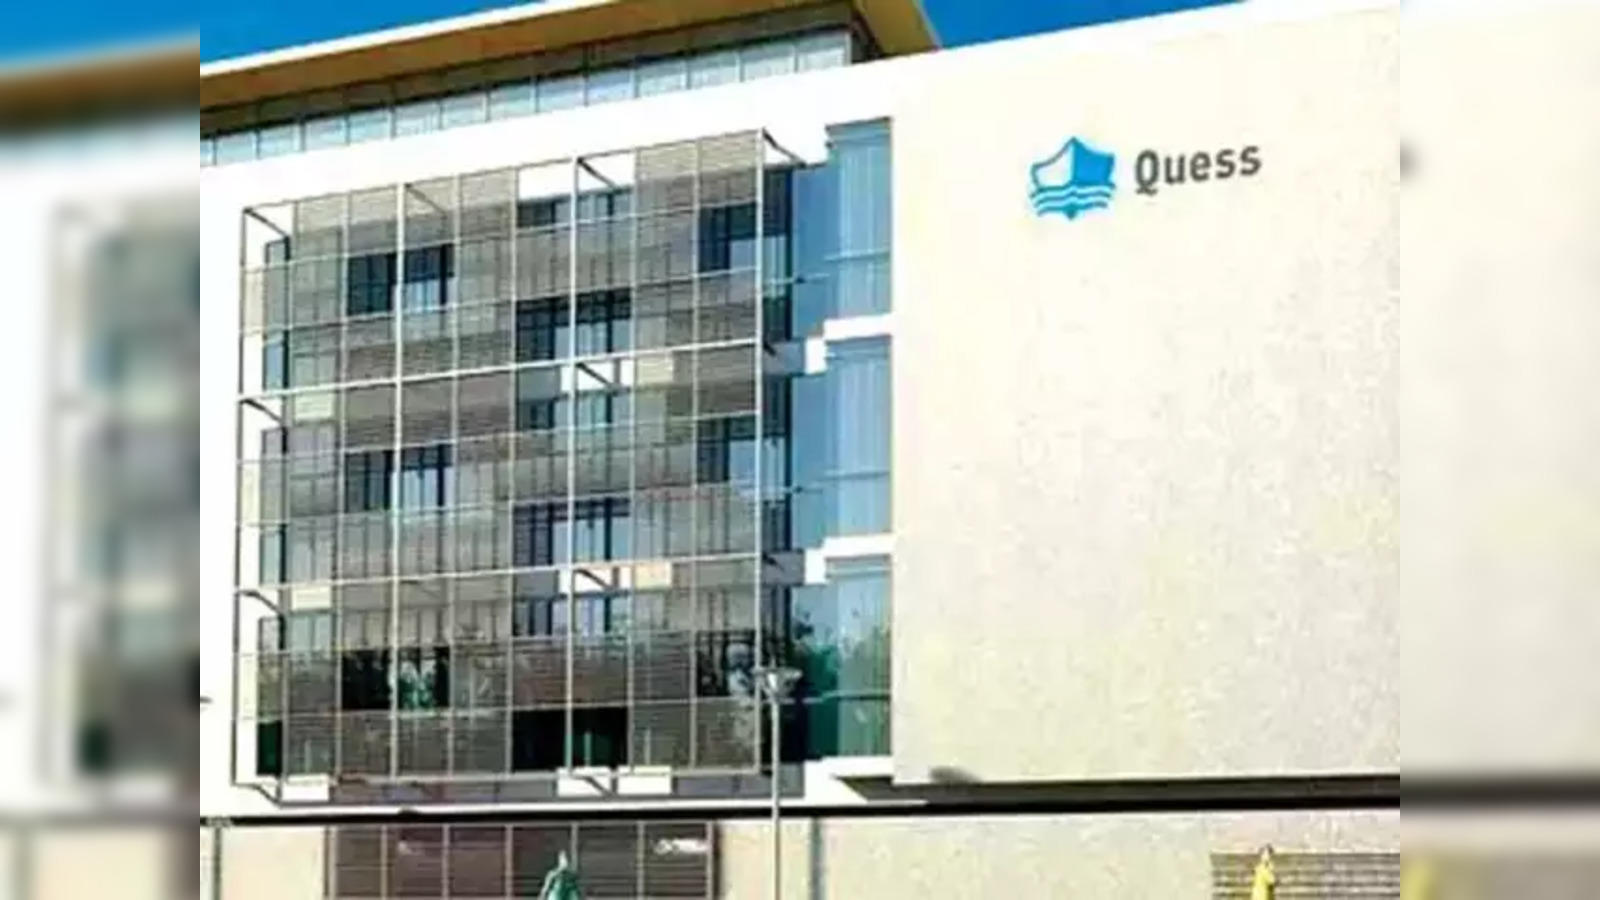 HCL: Quess Corp buys Monster's India unit and care business from HCL  services - The Economic Times